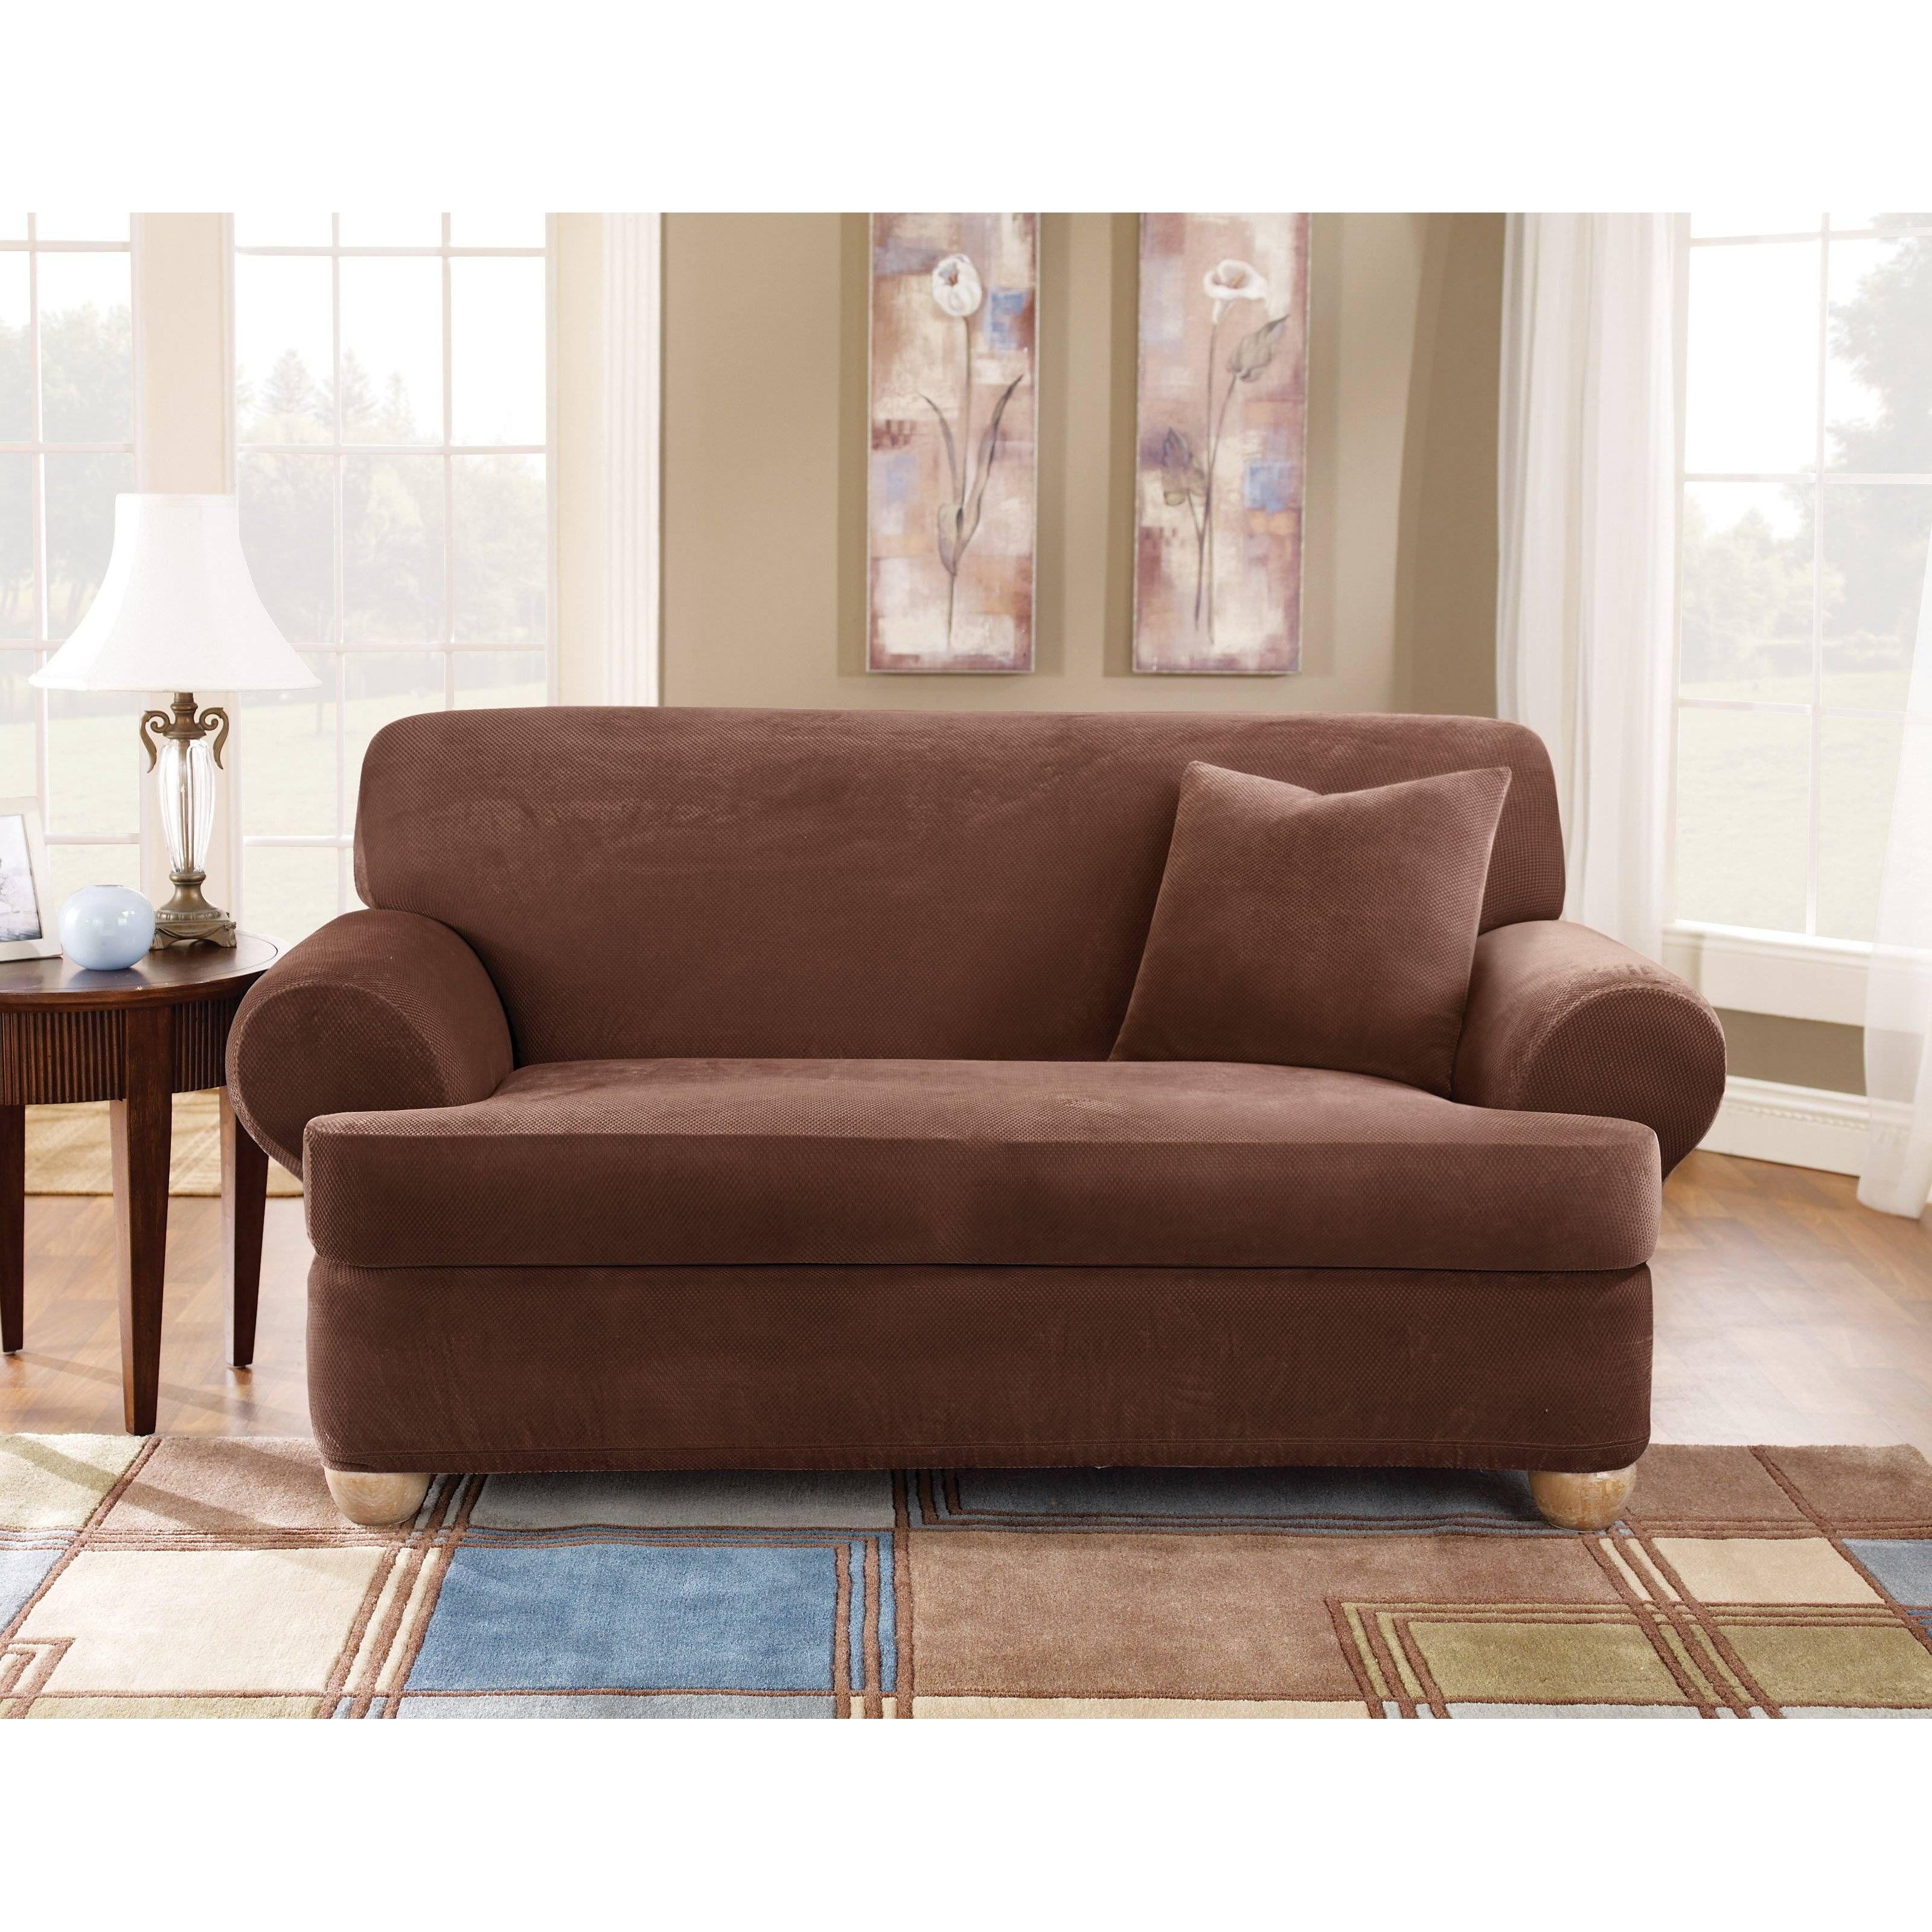 Sure Fit Stretch Pique T Cushion Three Piece Sofa Slipcover Pertaining To Walmart Slipcovers For Sofas (View 16 of 30)